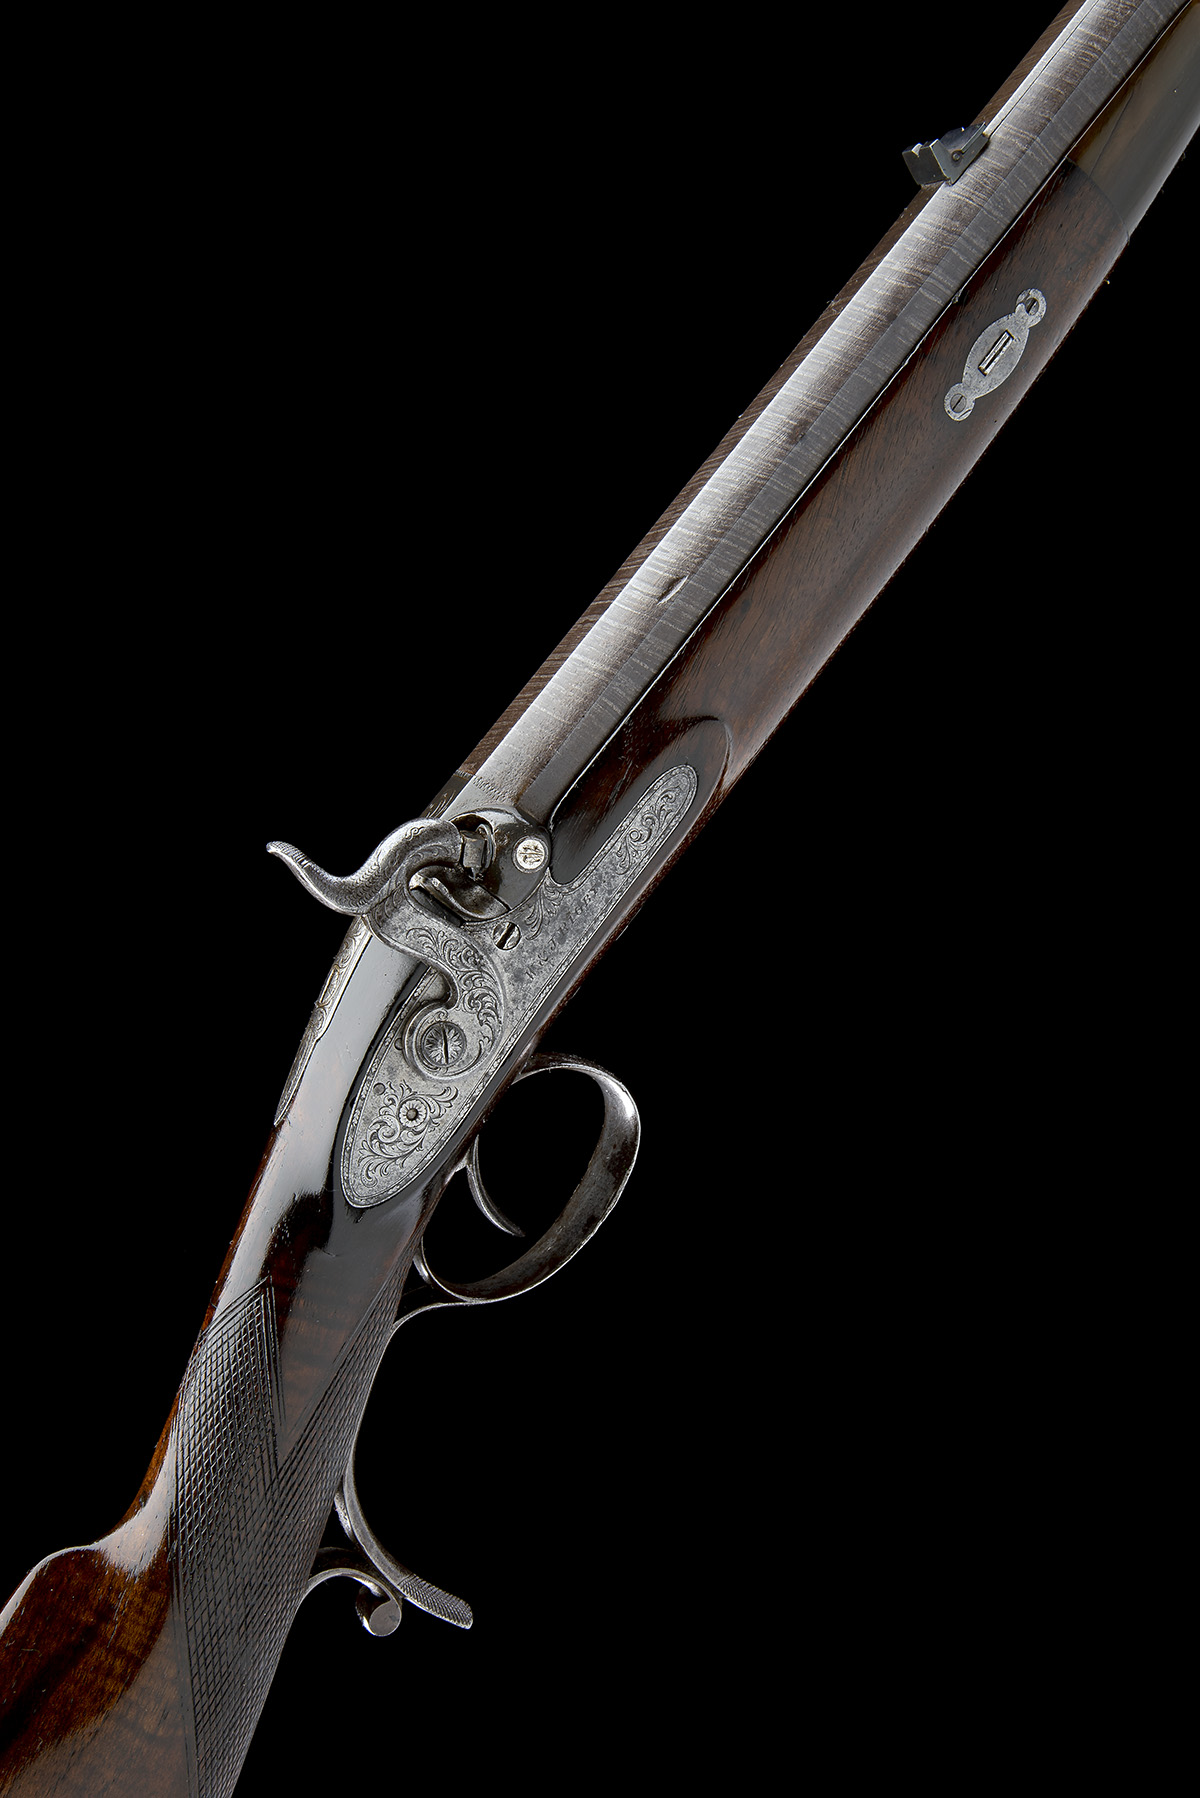 W. & J. RIGBY, DUBLIN A 22-BORE PERCUSSION SINGLE-BARRELLED RIFLE FOR LARGER GAME, serial no. 10708,